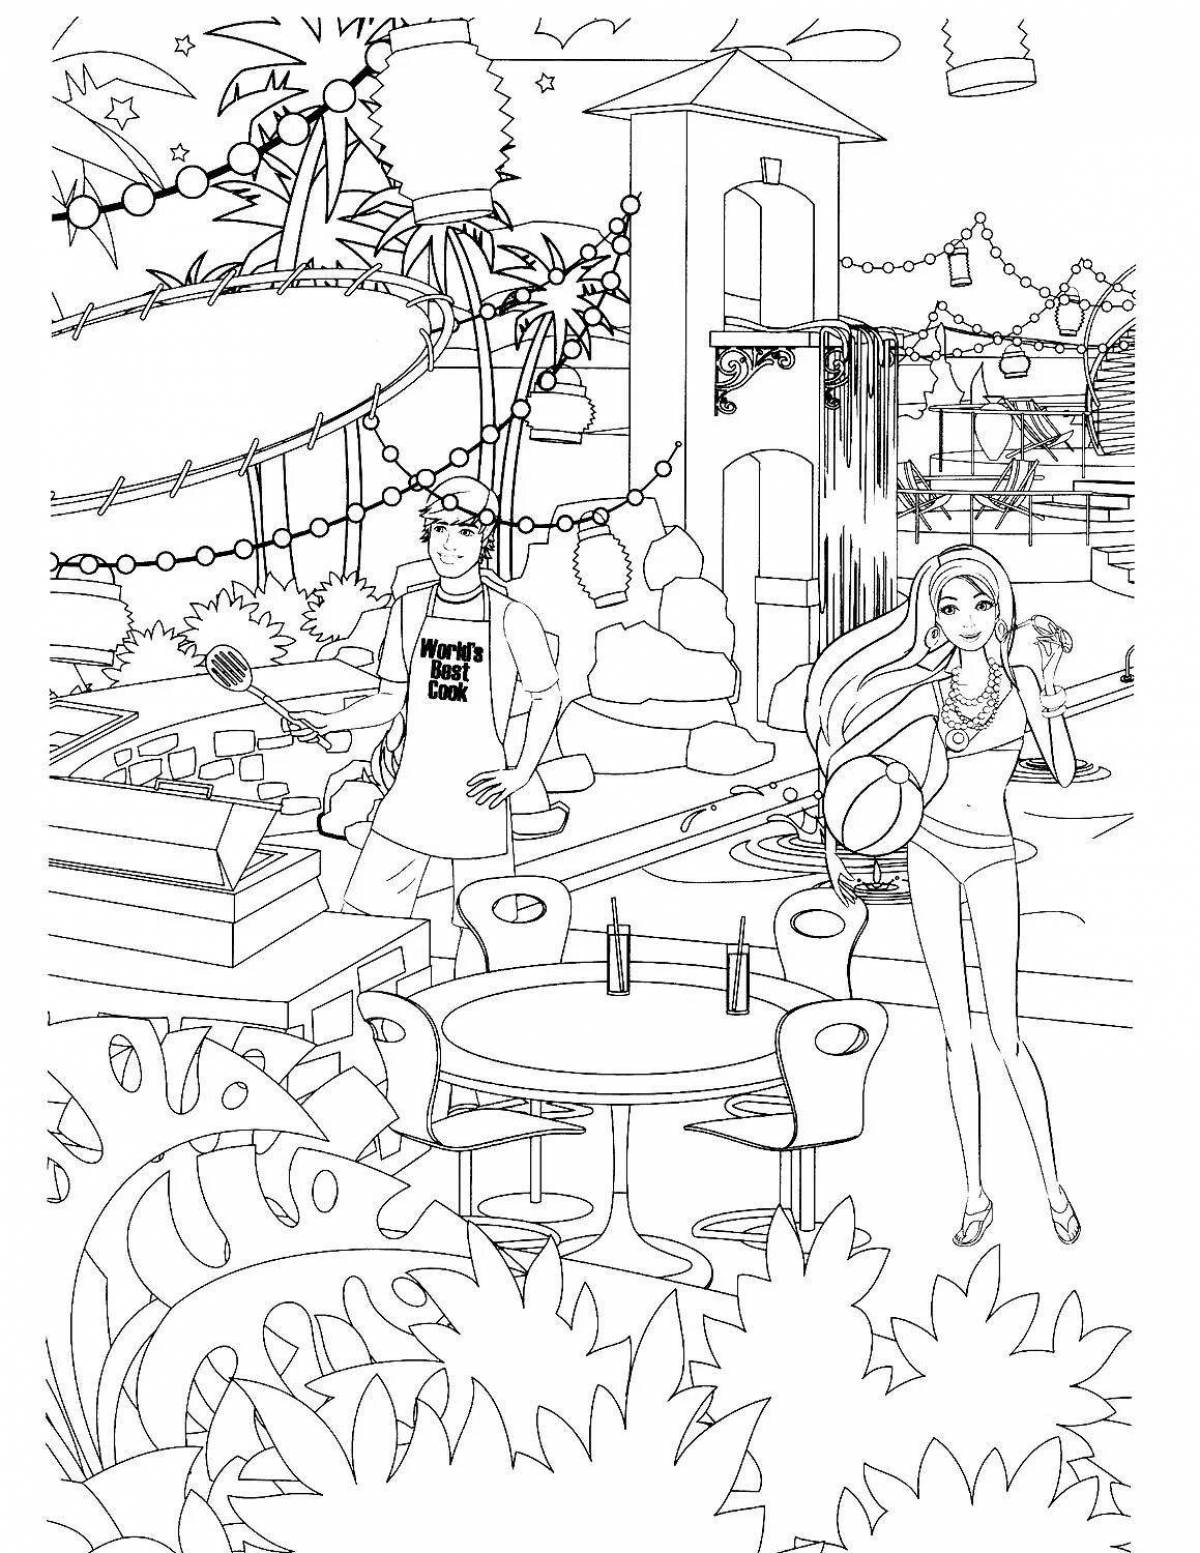 Sparkly barbie on beach coloring page